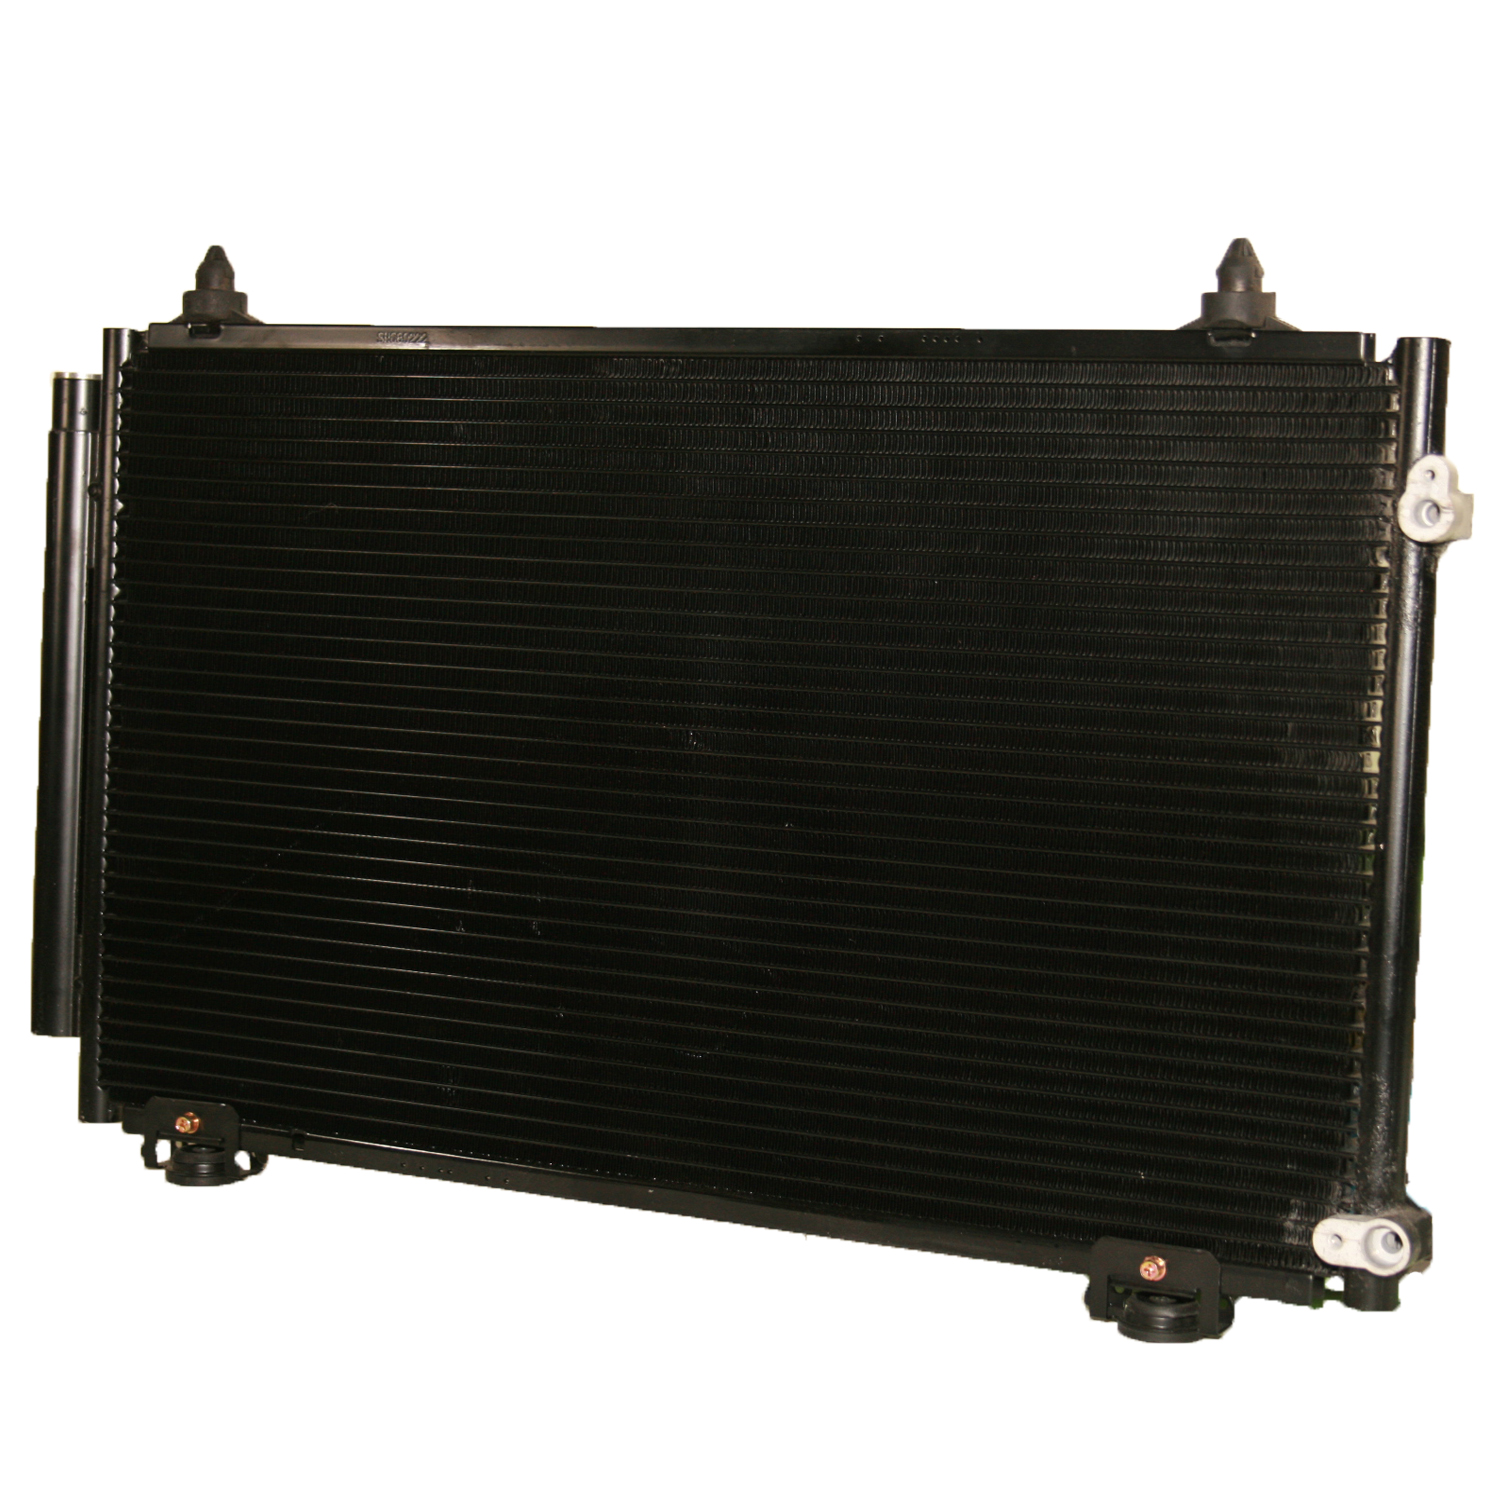 TCW Condenser 44-3085 New Product Image field_60b6a13a6e67c